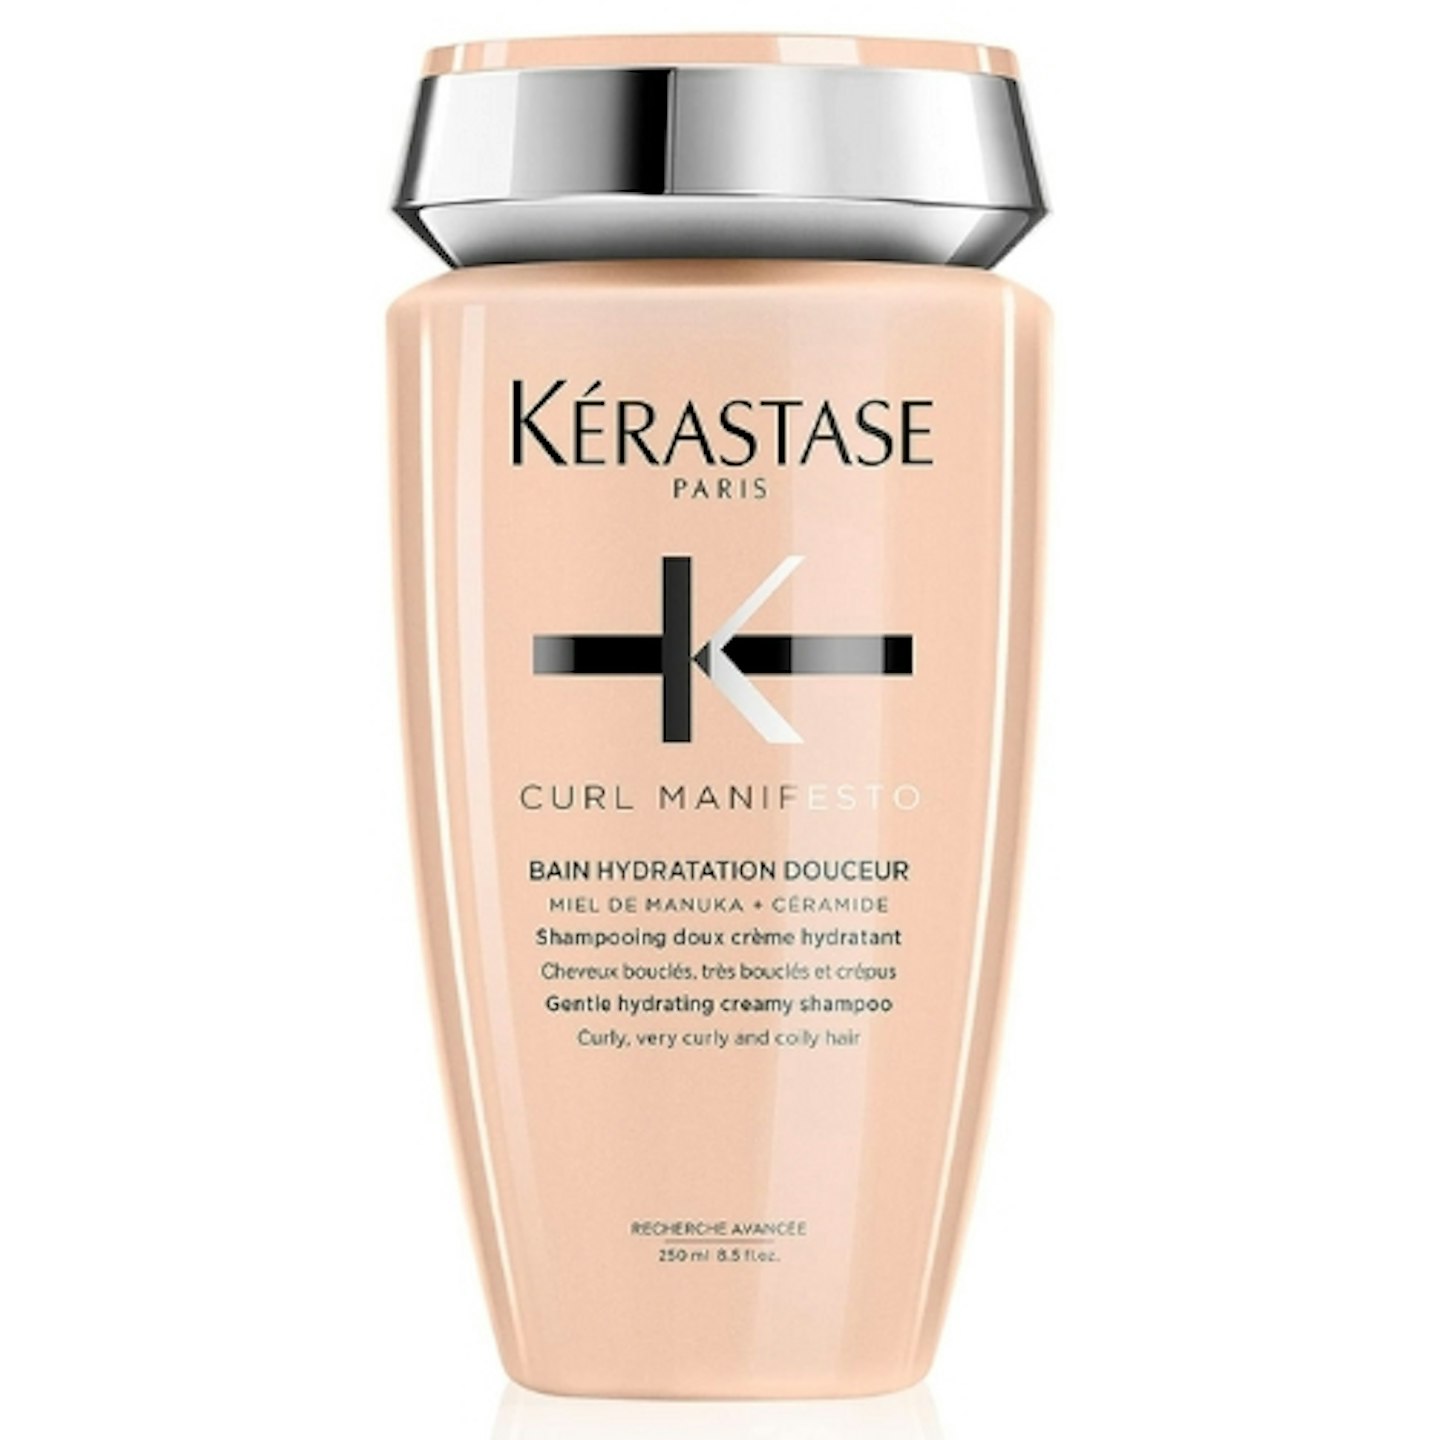 Kérastase Curl Manifesto Shampoo For Curly to Very Curly and Coily Hair With Manuka Honey and Ceramide 250ml